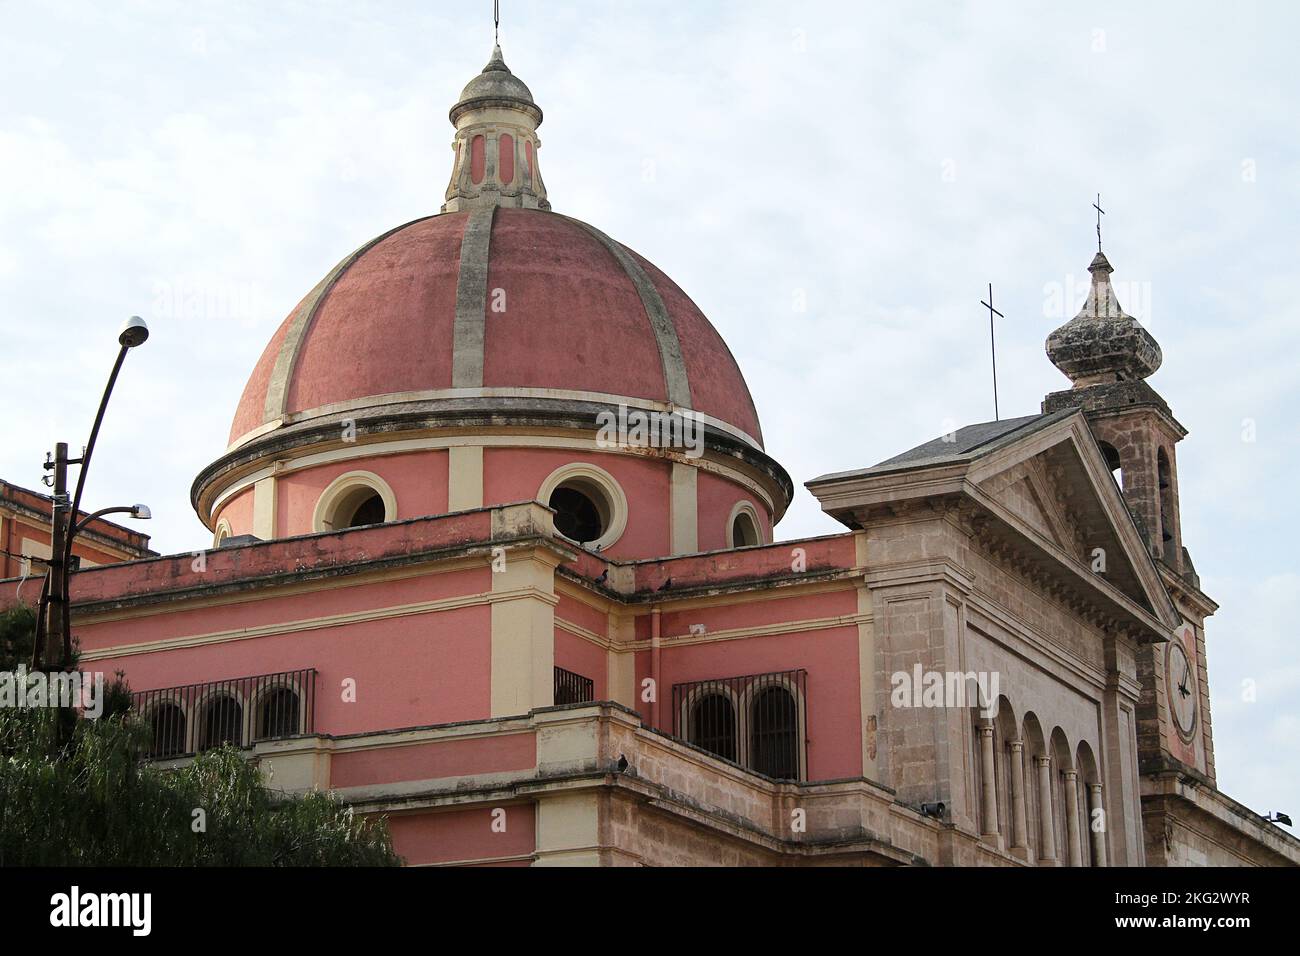 Fasano, Italy. Exterior view of Church of S. Anthony the Abbot, b. 16th- 18th century in Neoclassical style. The dome, bell/ clock tower & pediment. Stock Photo